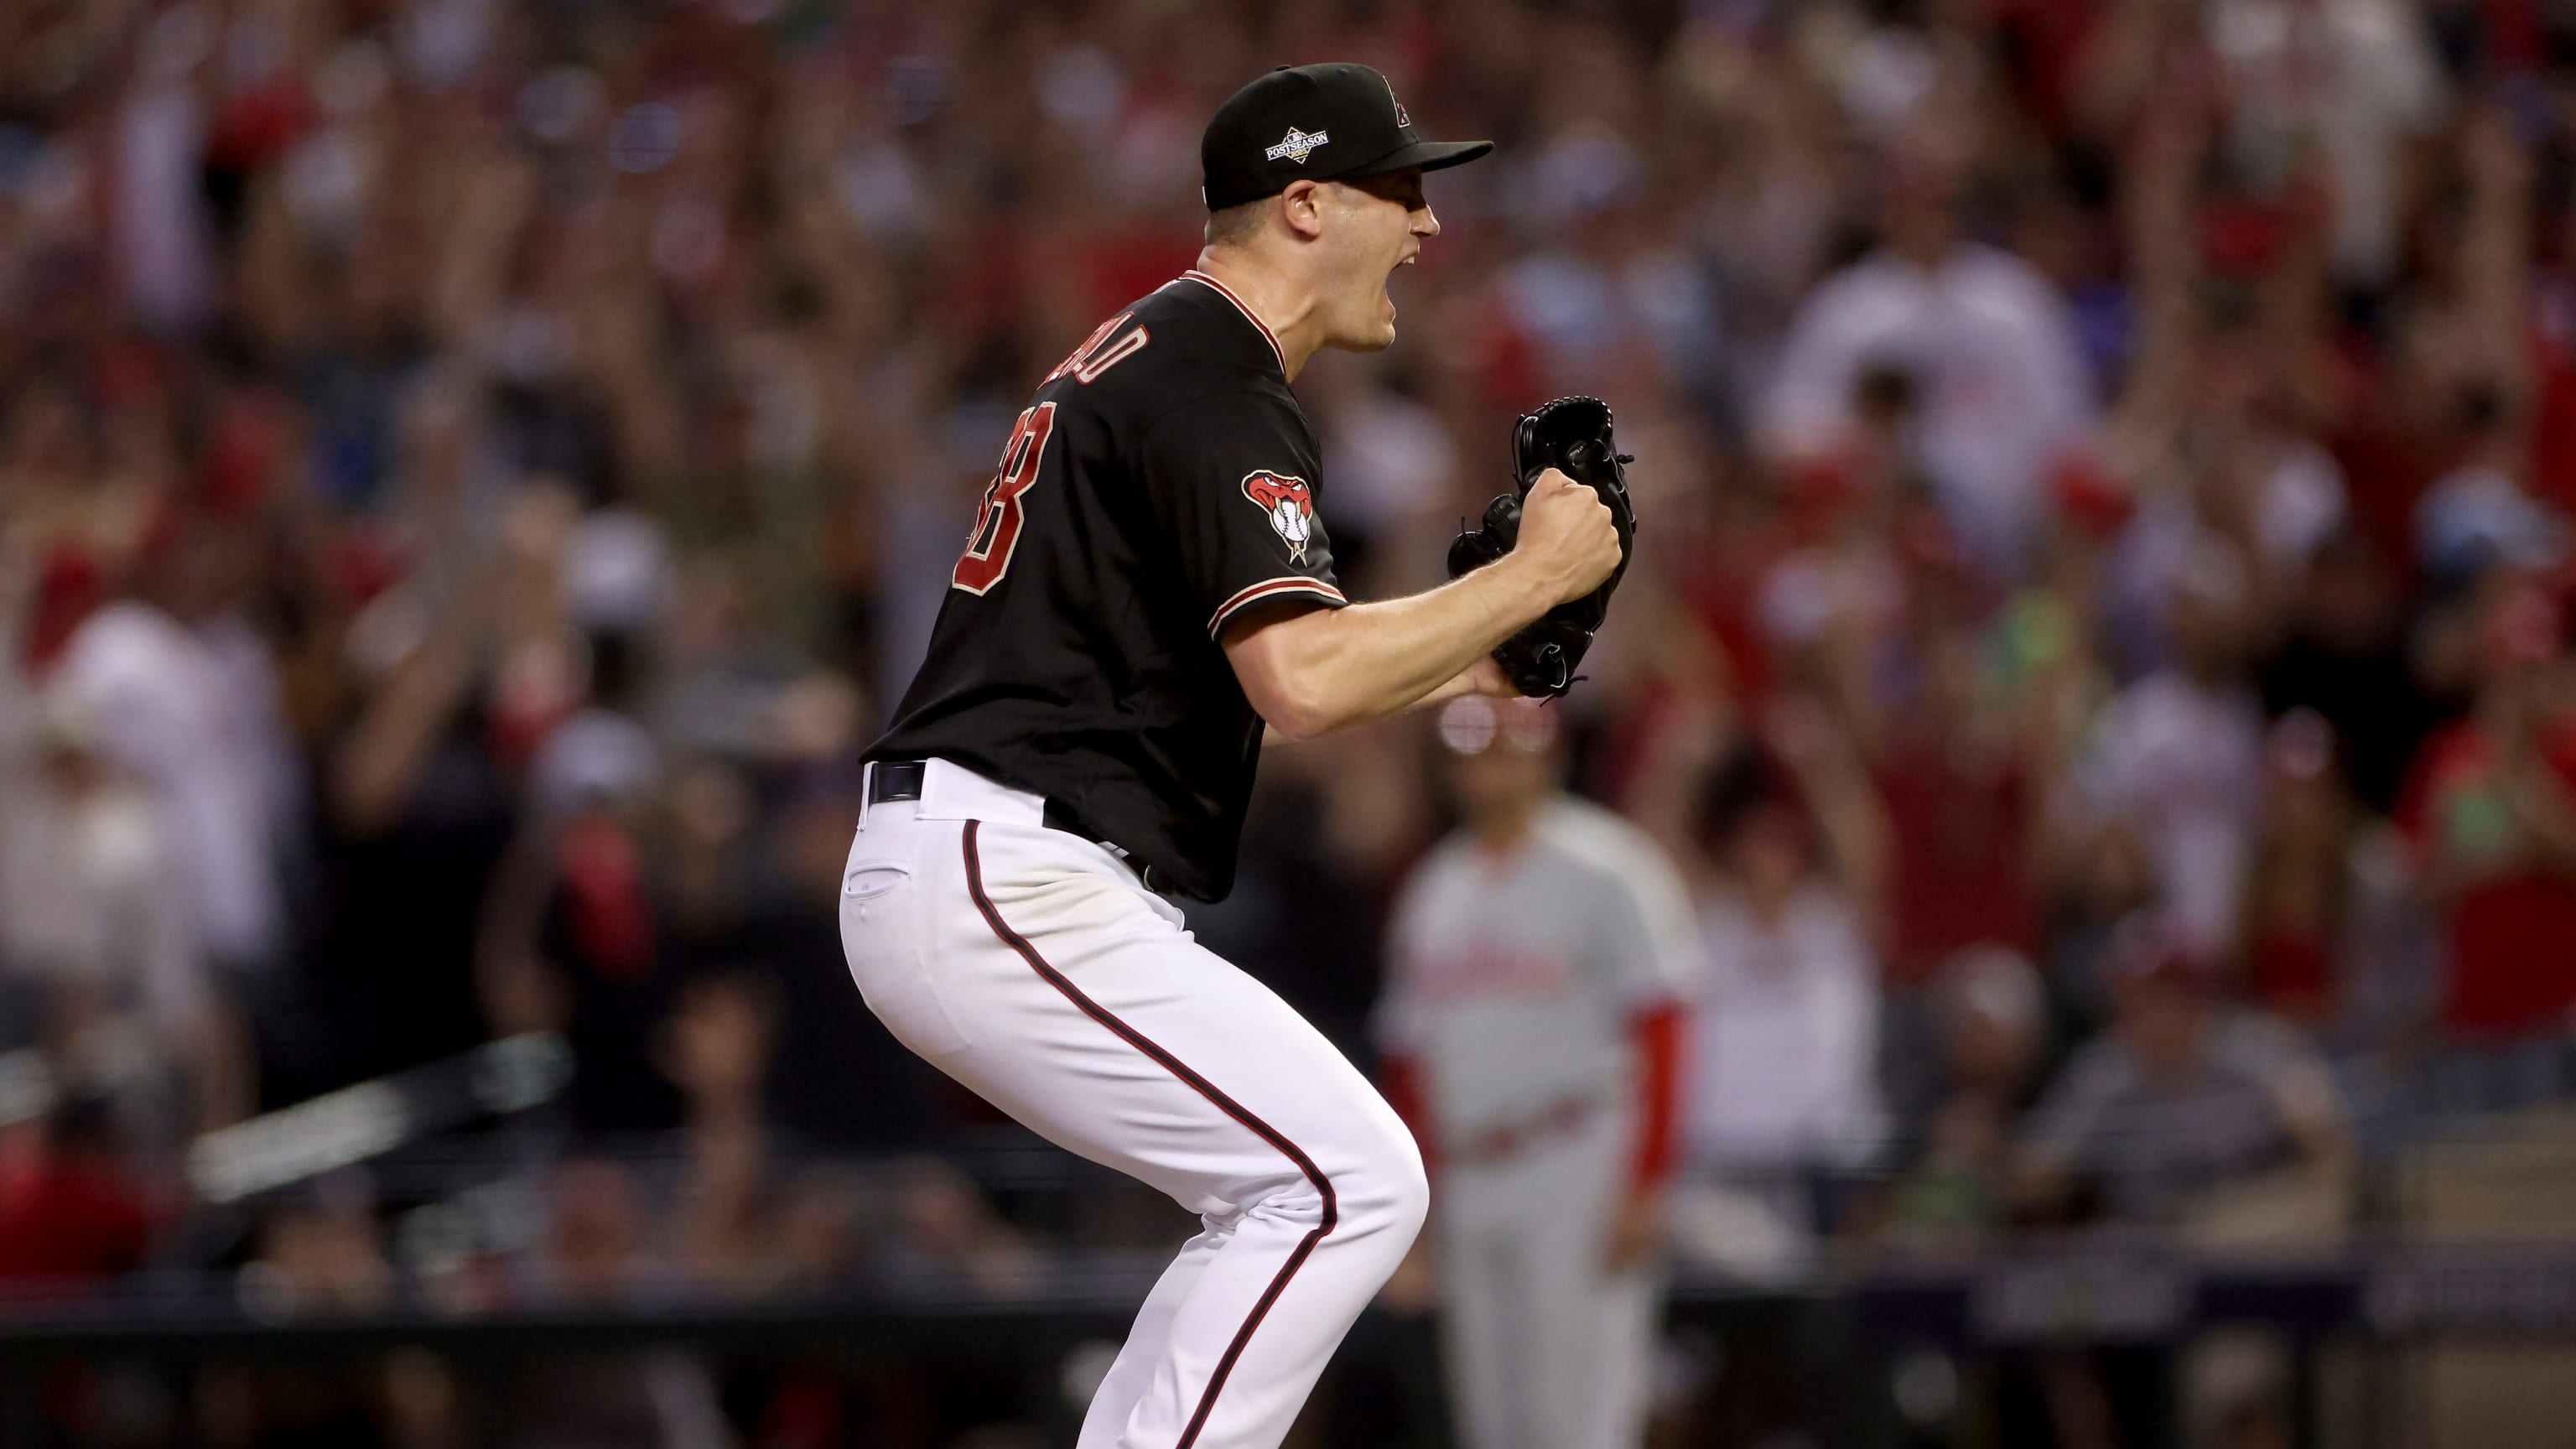 D-backs vs. Phillies NLCS Game 2 starting lineups and pitching matchup 2023